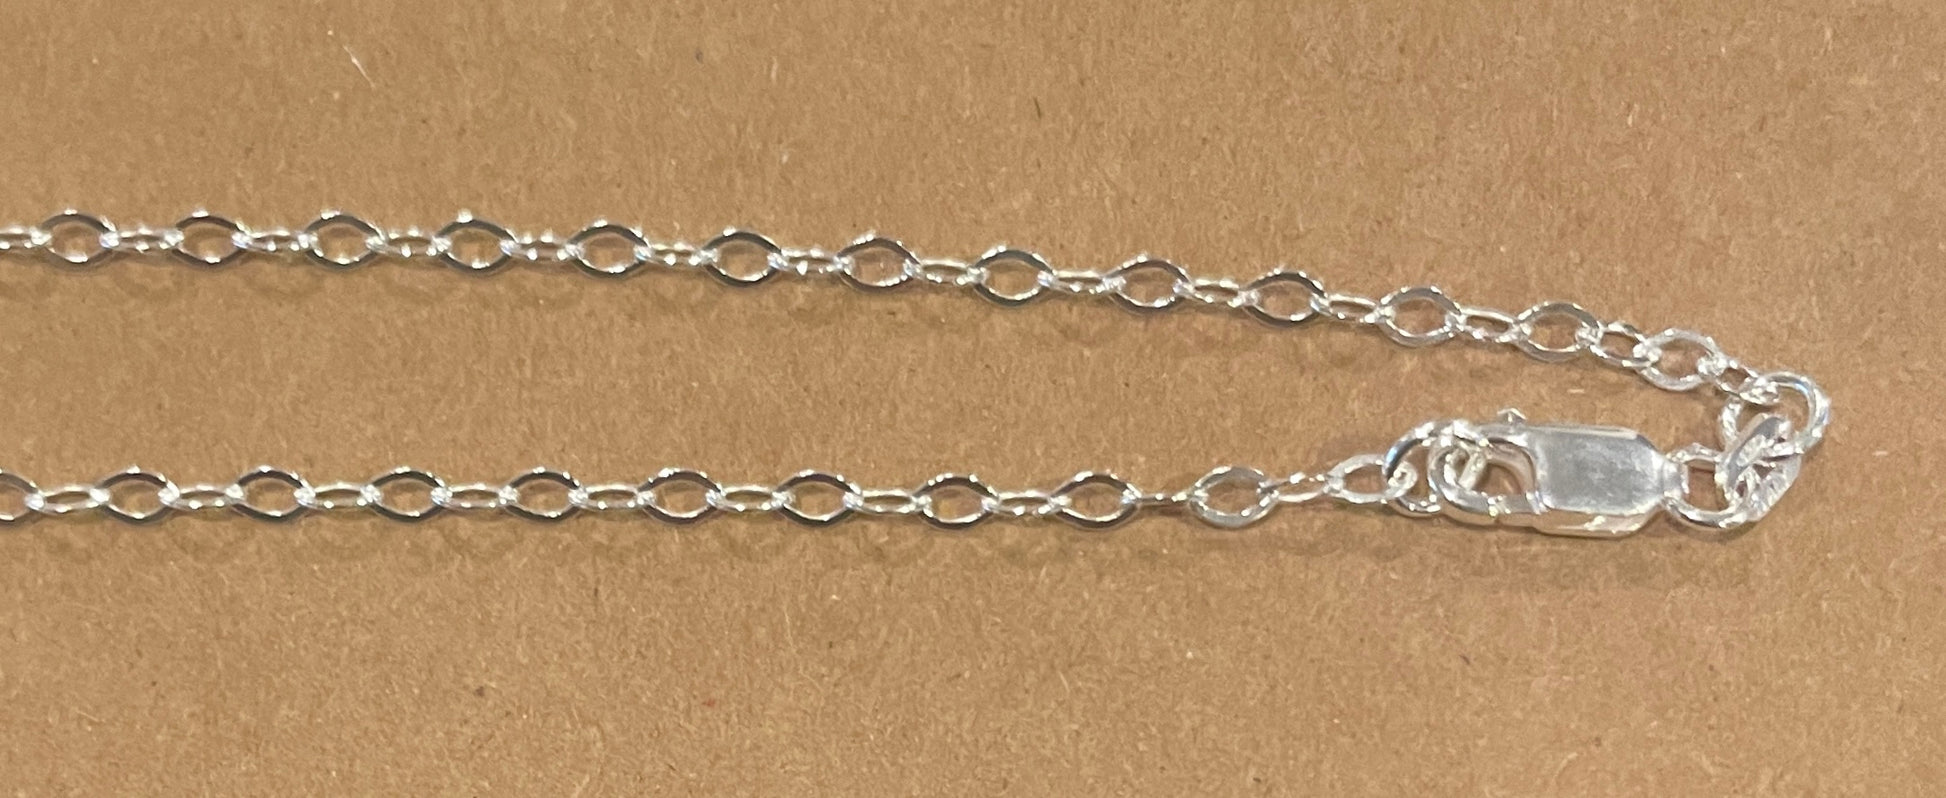 18in, 2.4mm flat oval cable sterling silver chain.  Chain made in Italy.